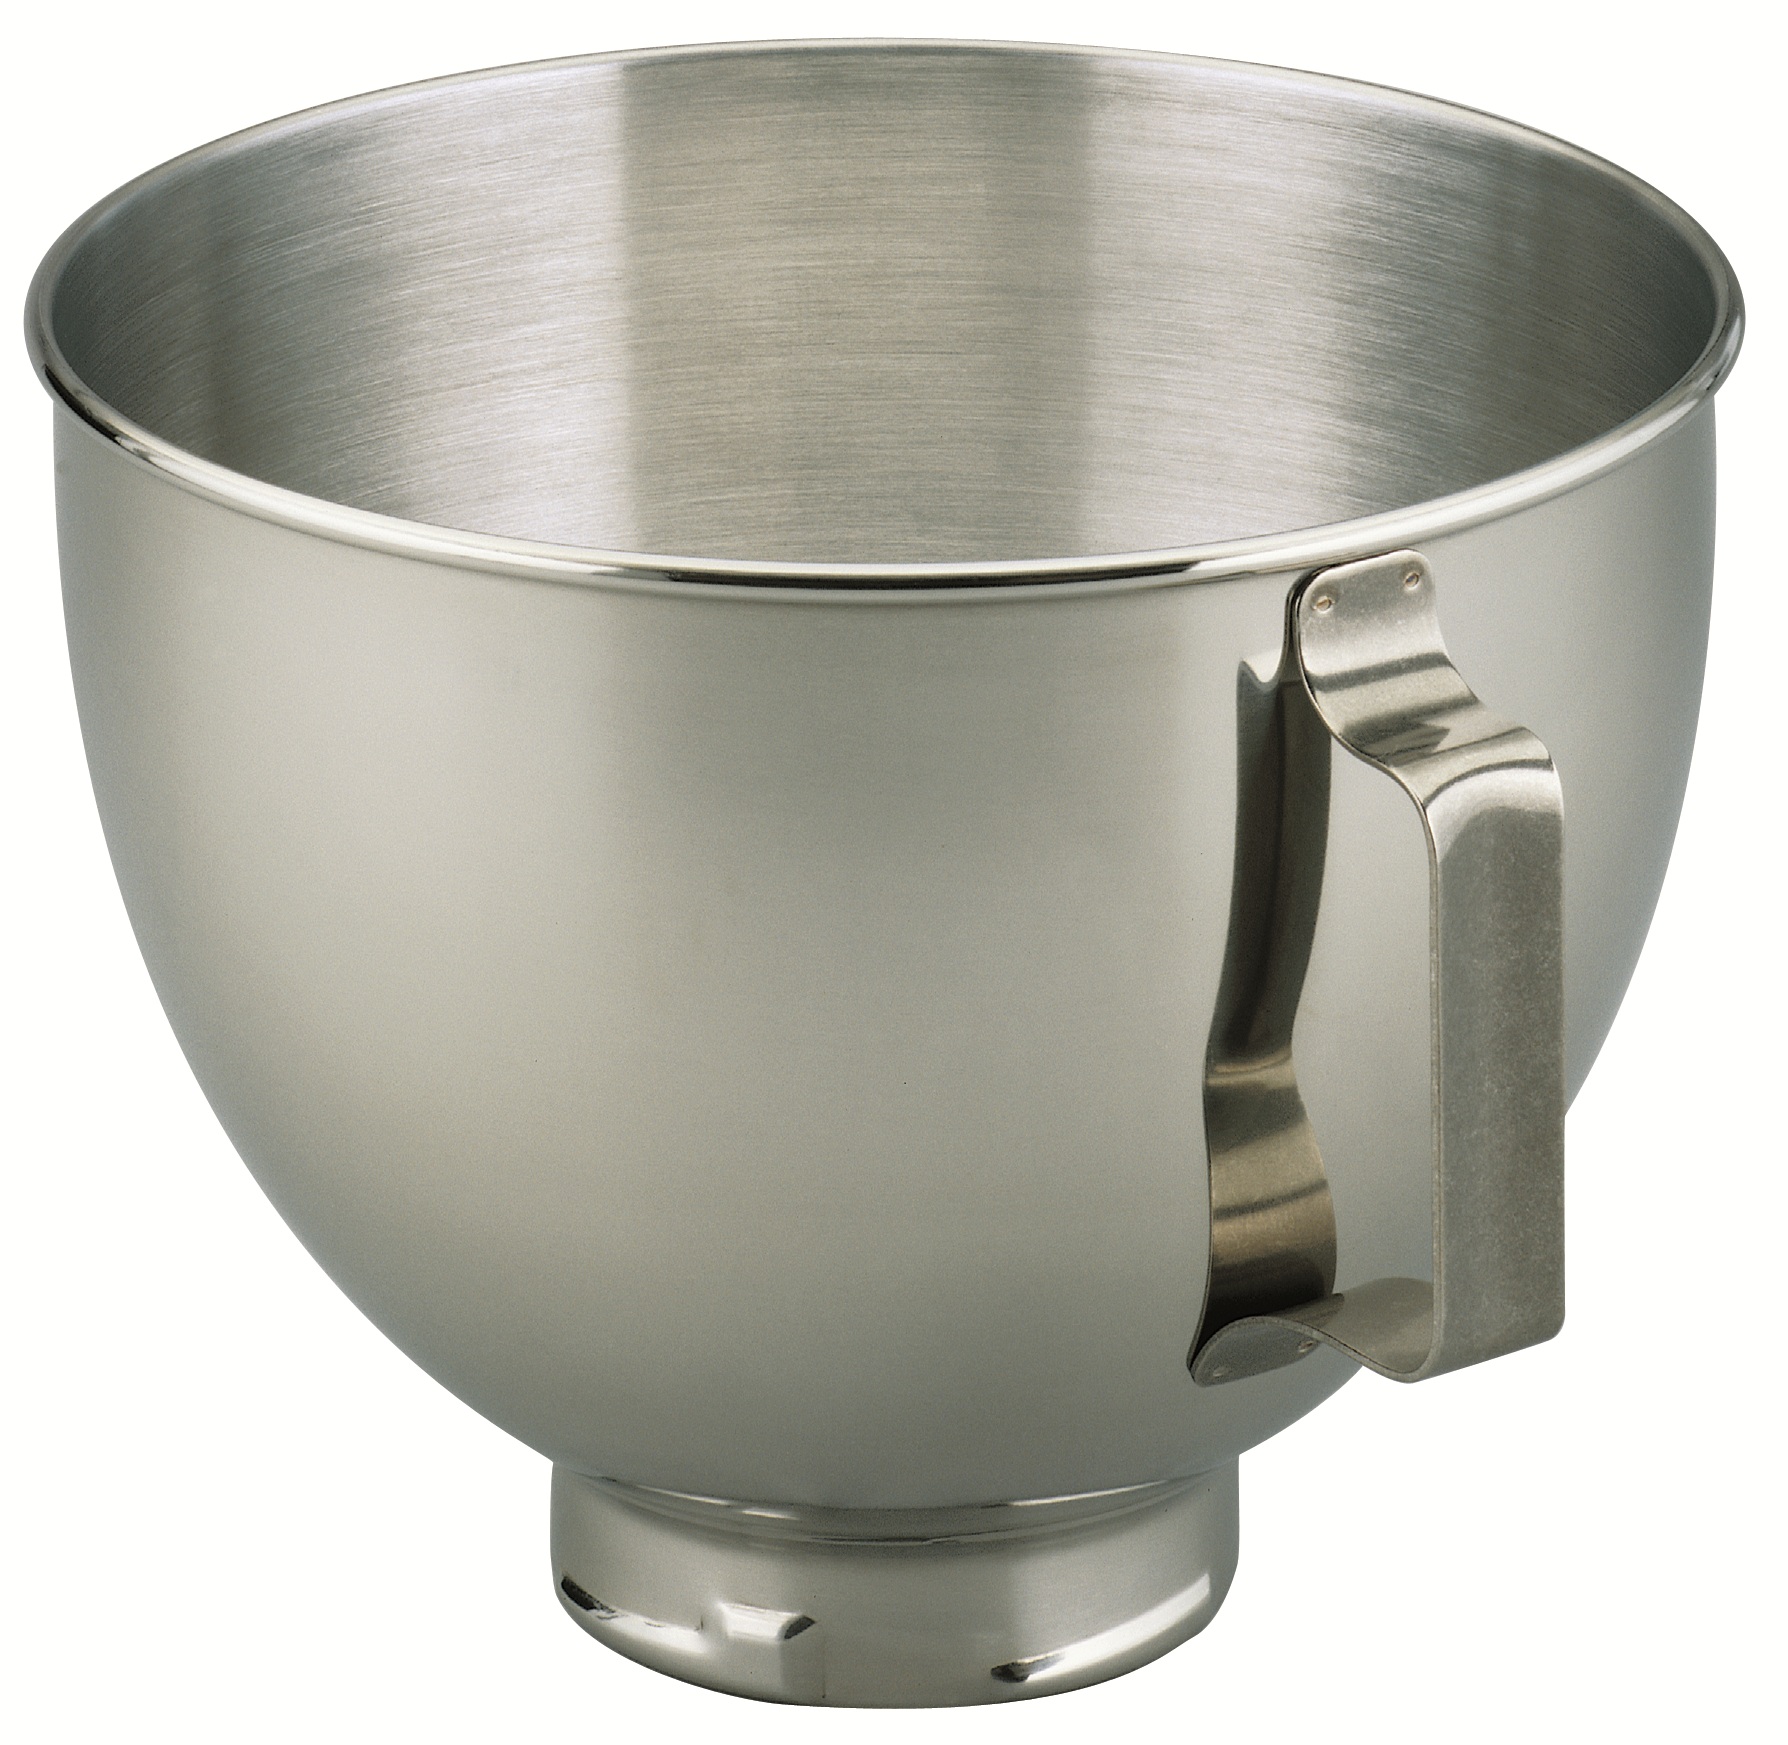 4.5-Quart Polished Stainless Steel Bowl with Handle